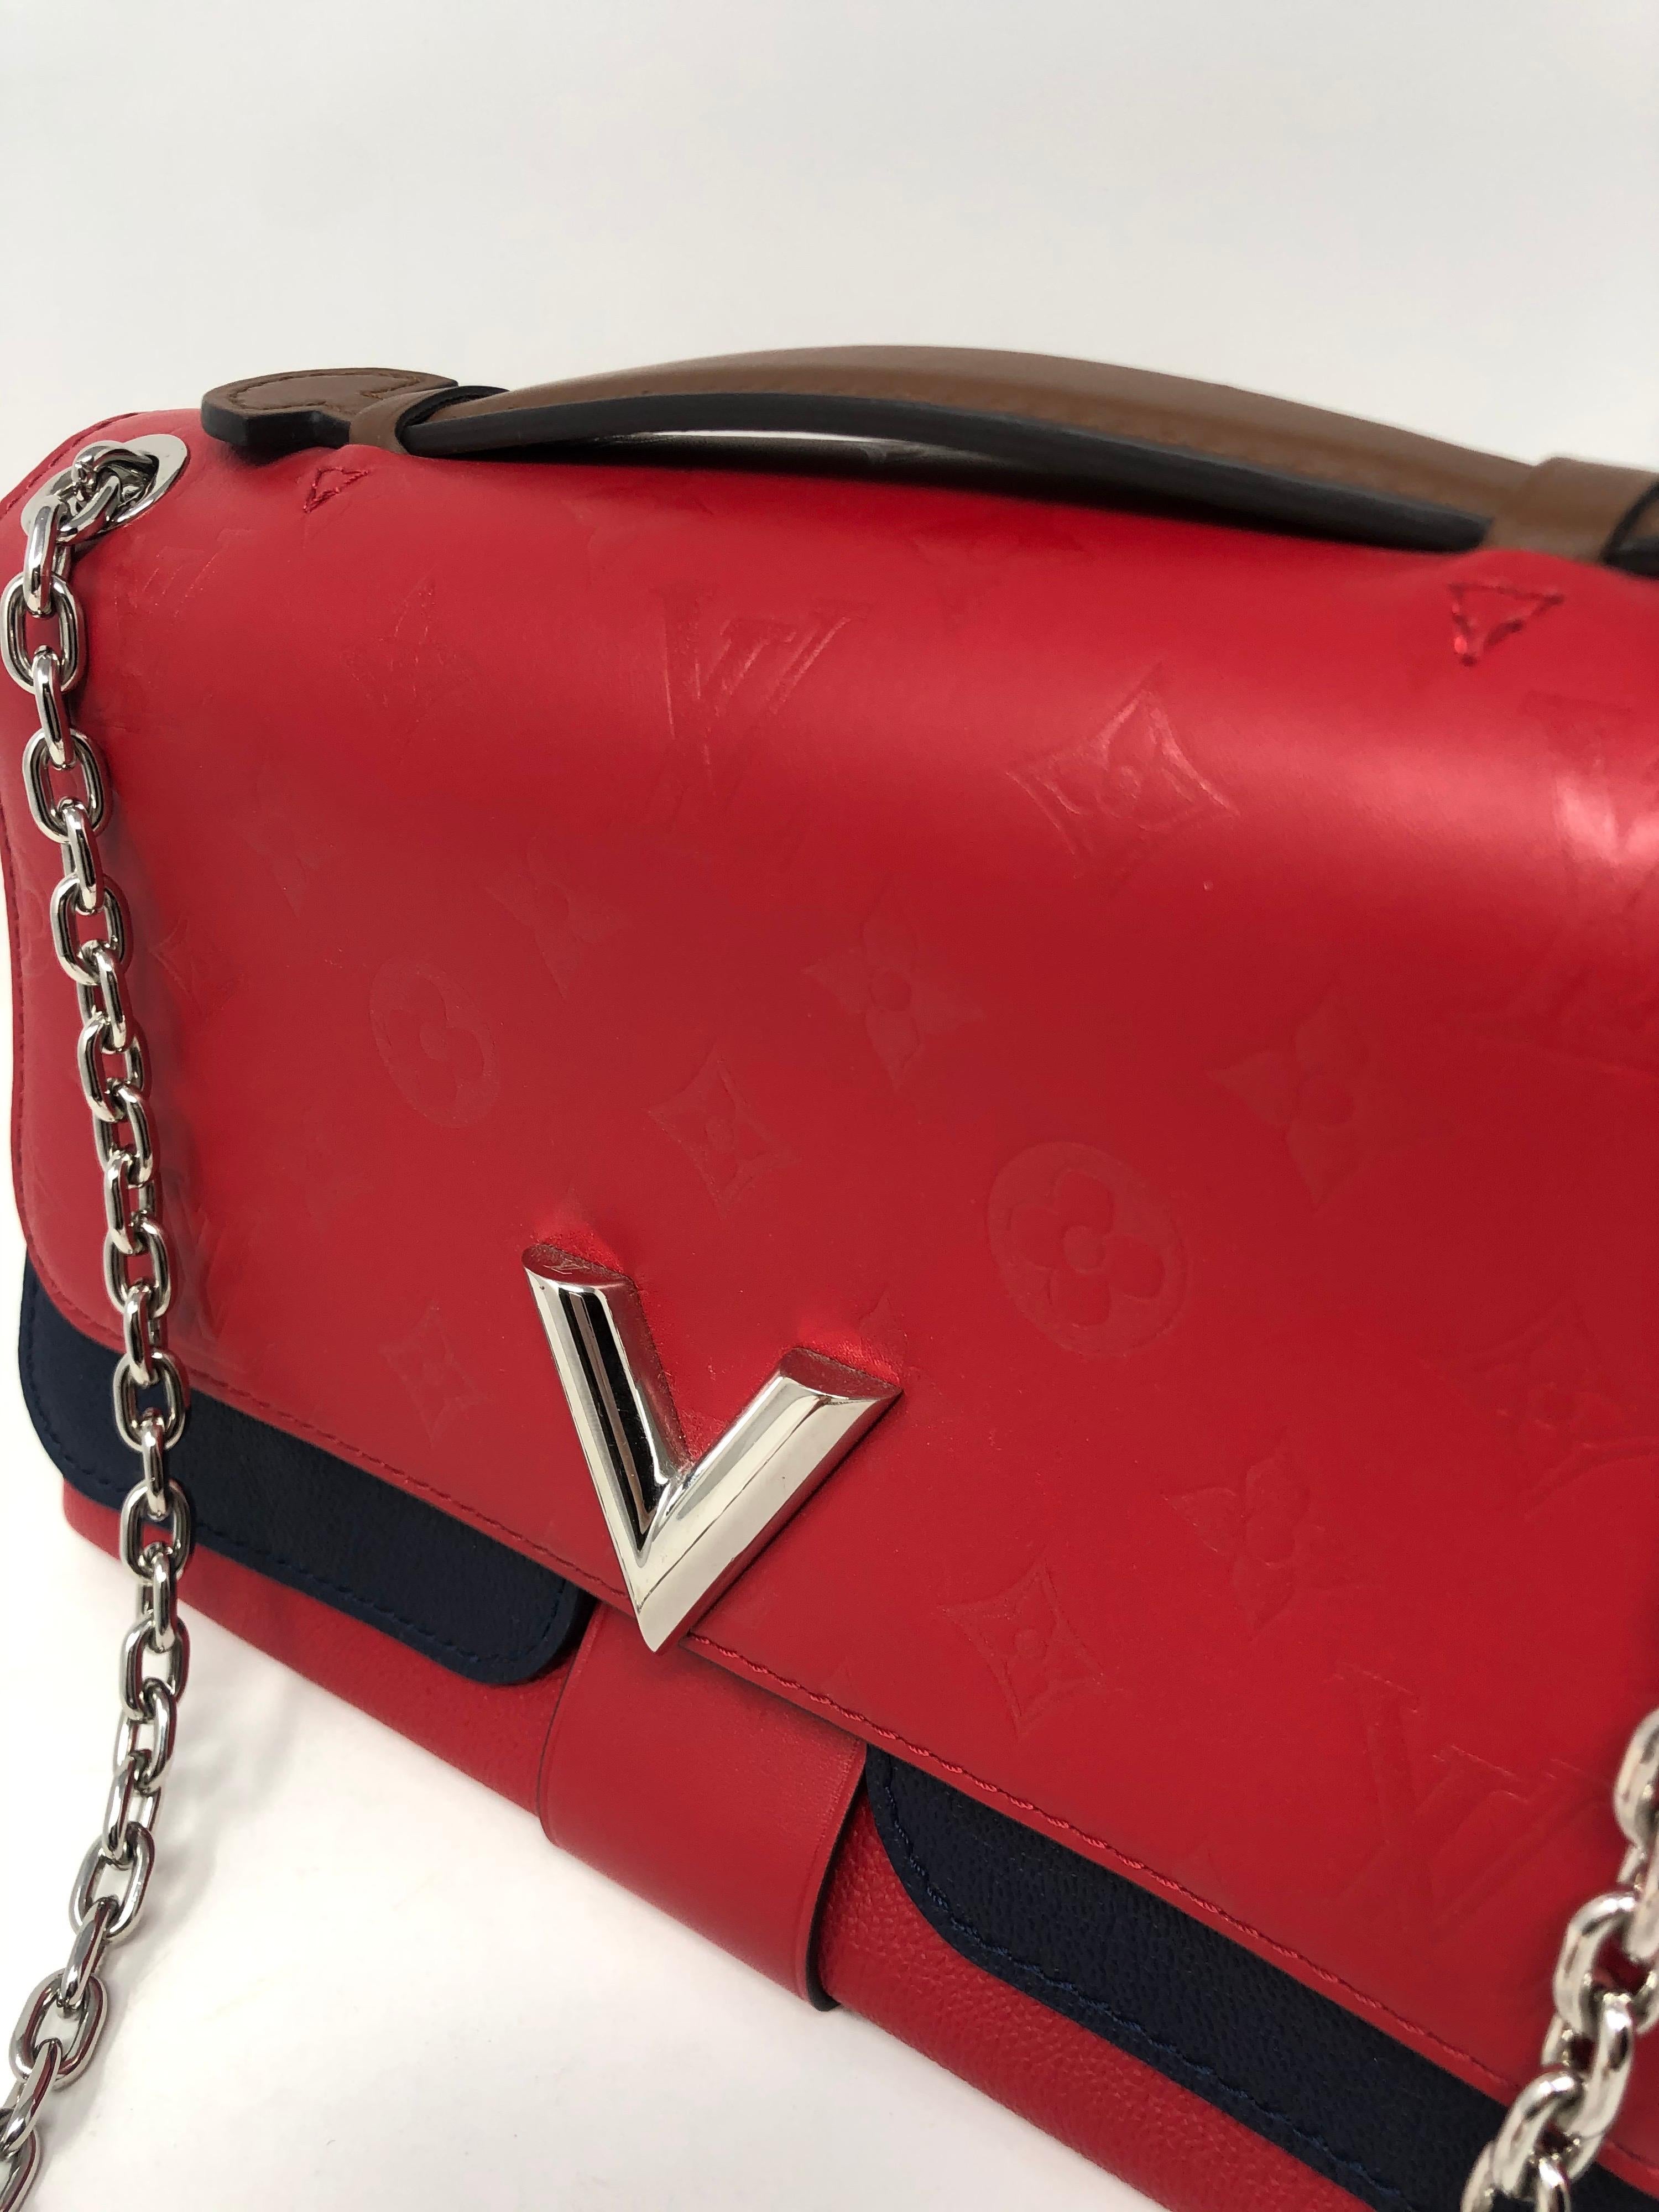 Women's or Men's Louis Vuitton Limited Edition Red and Navy Crossbody Bag